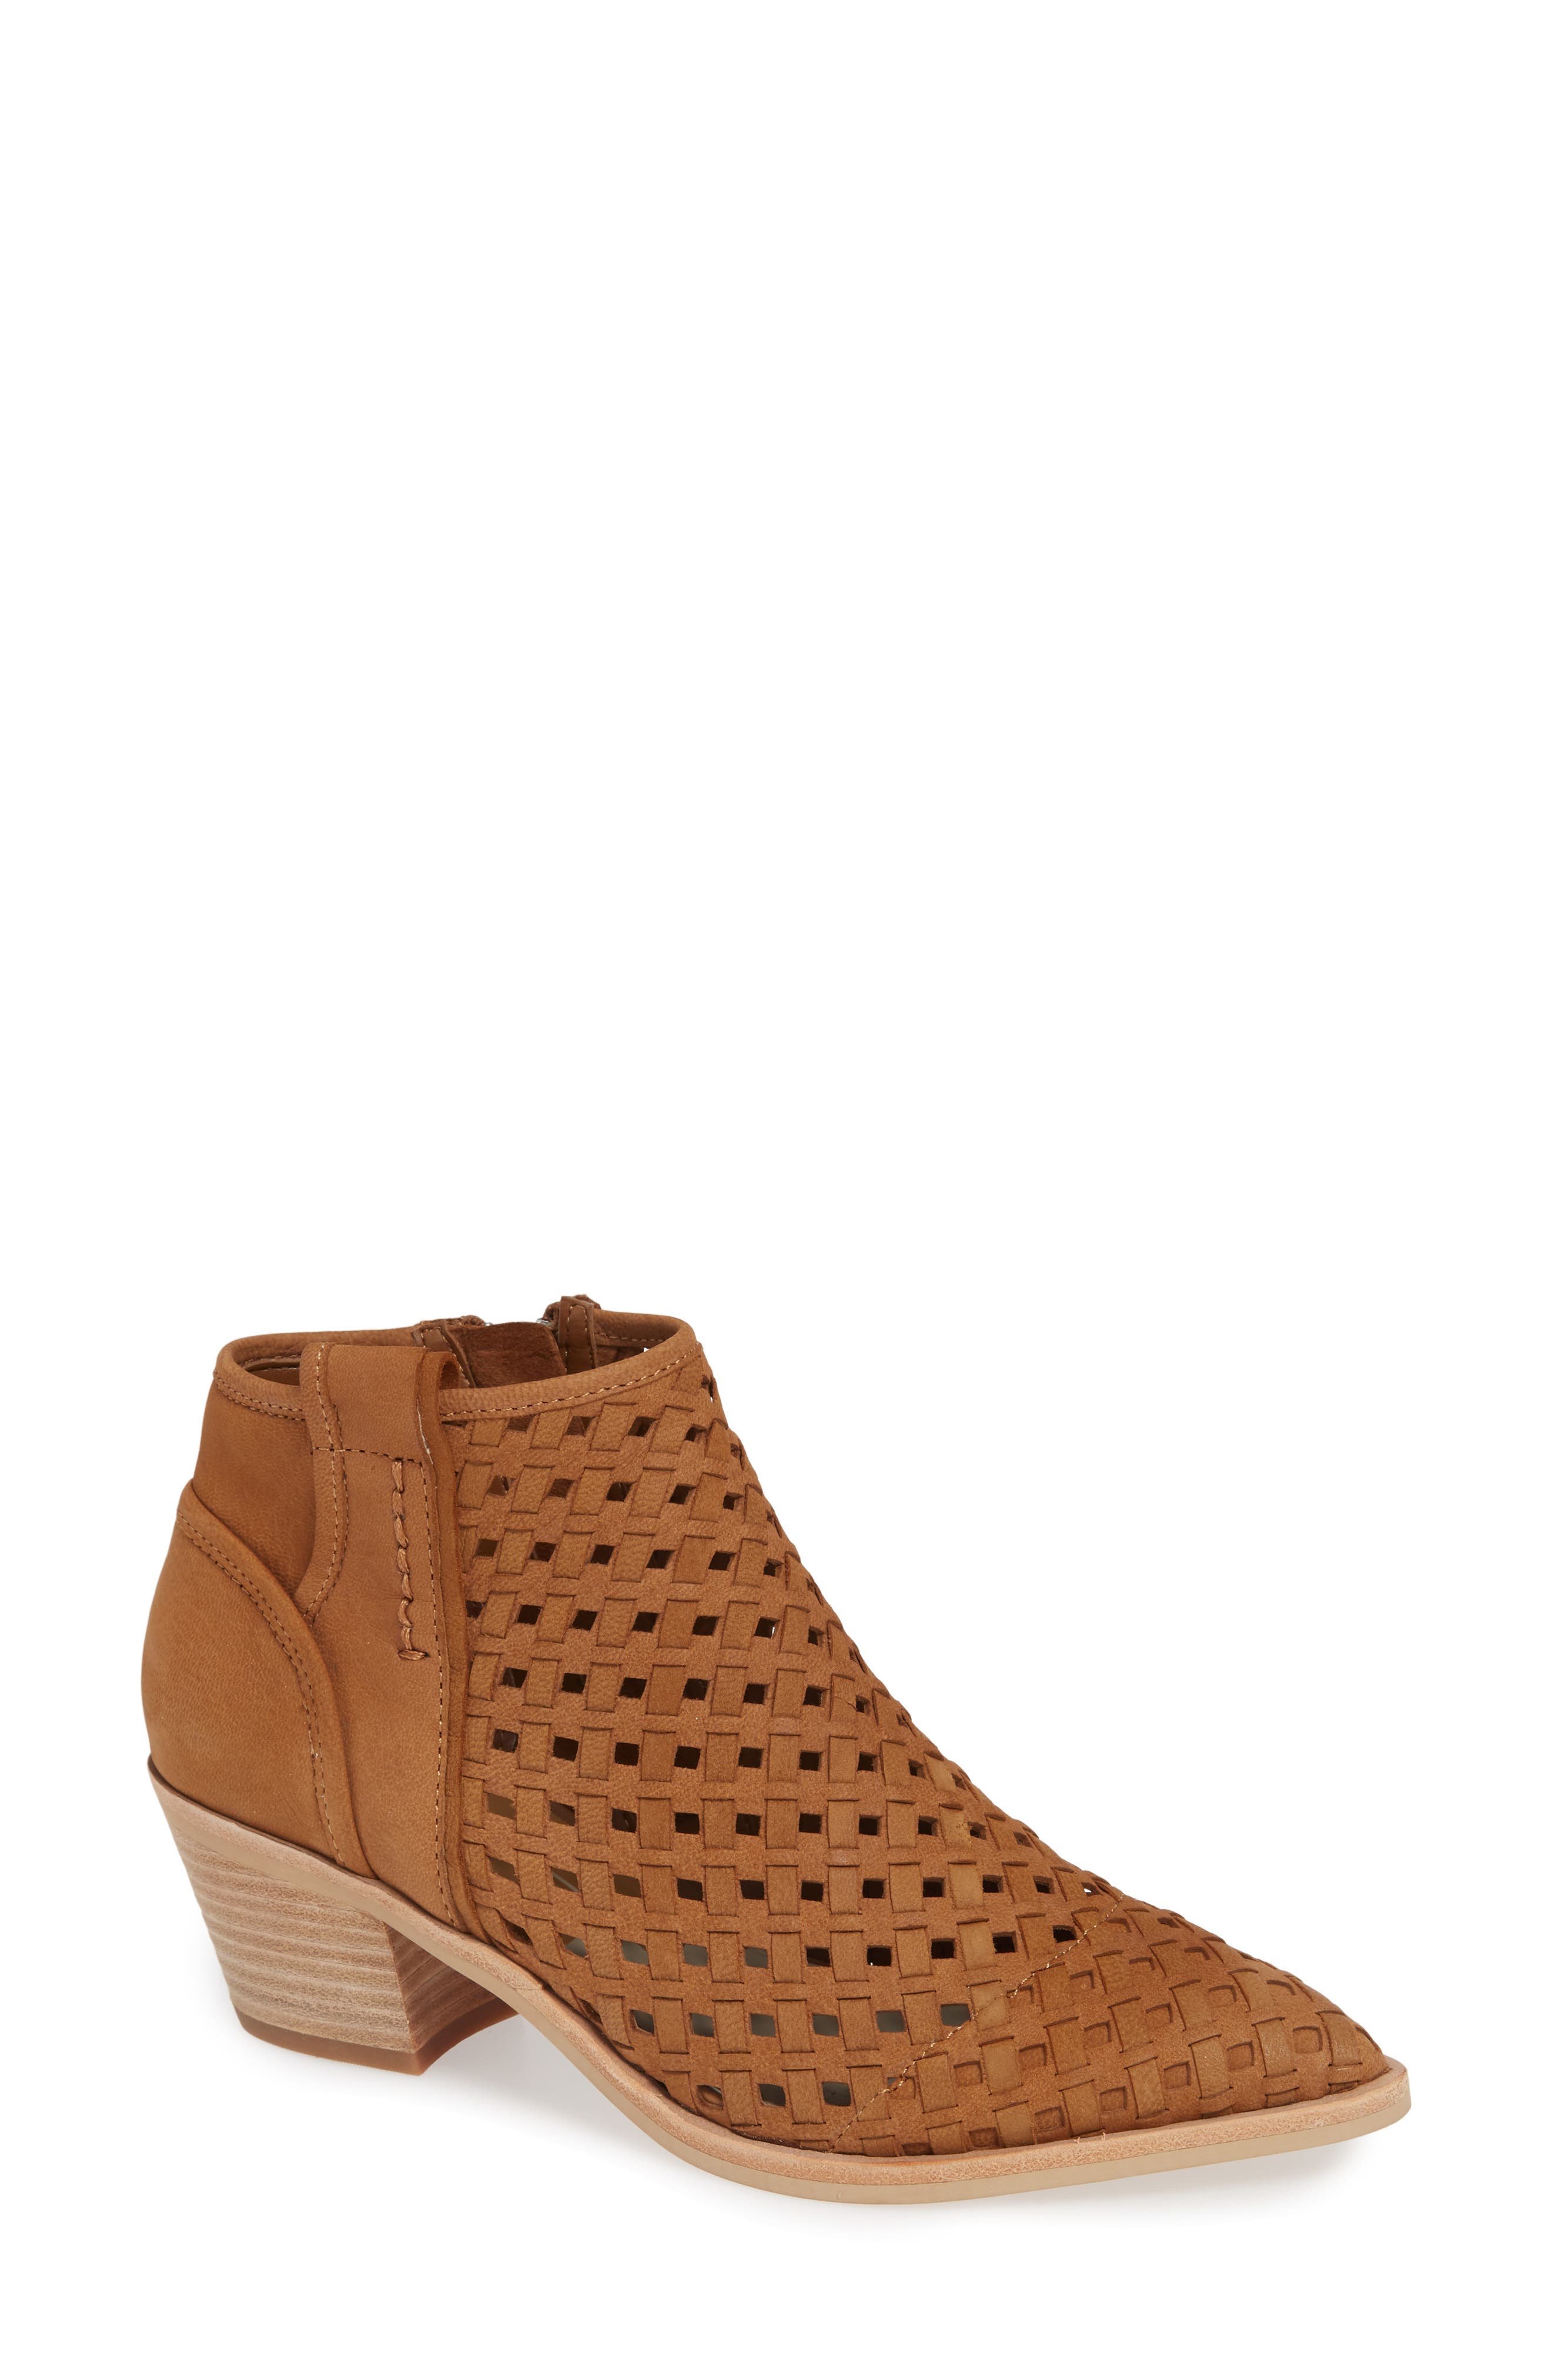 Dolce Vita | Spence Woven Bootie 